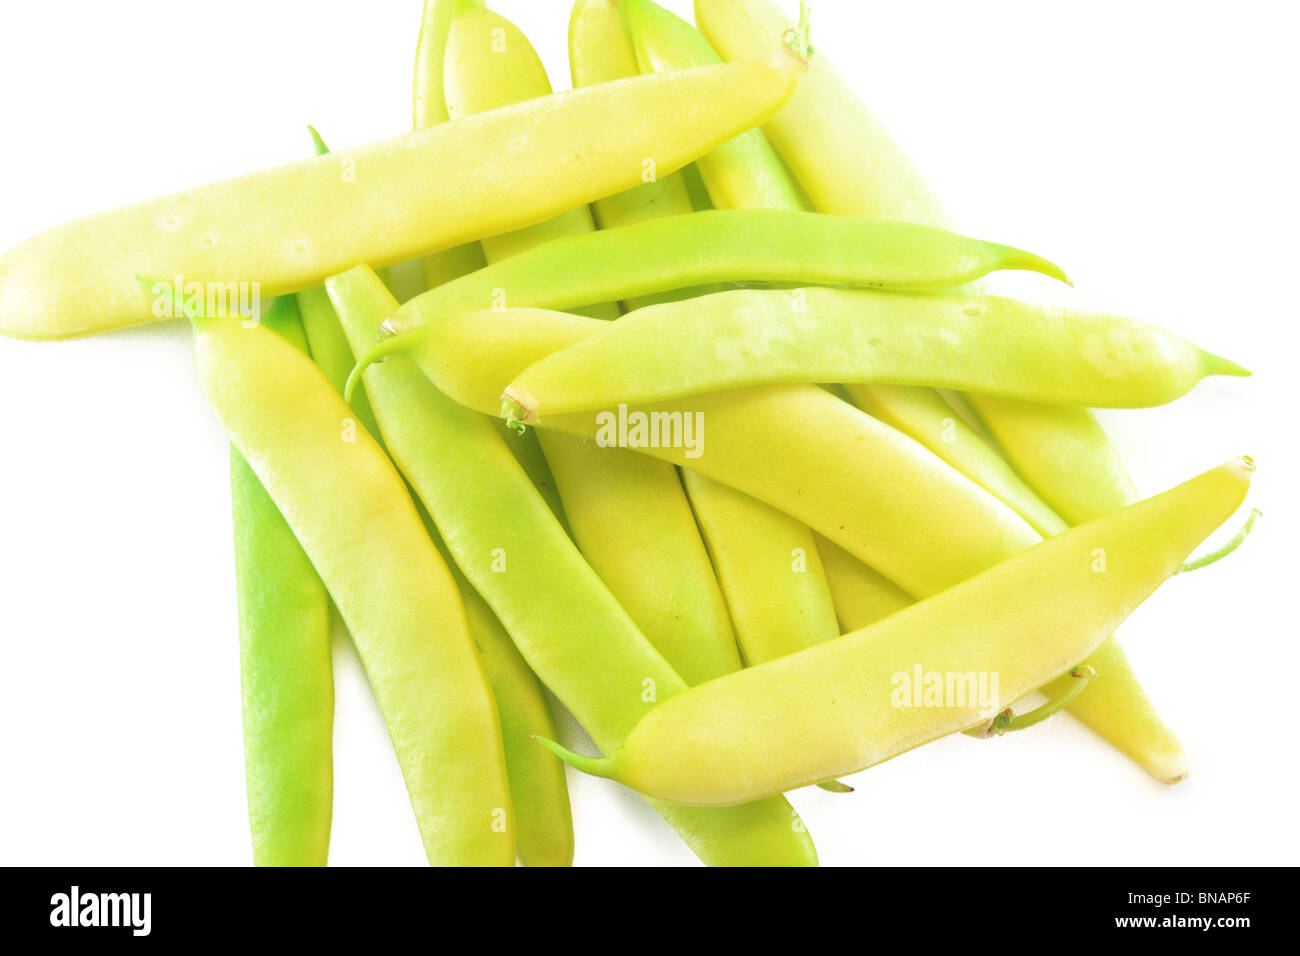 Pile of yellow wax bean pods isolated on the white background Stock Photo